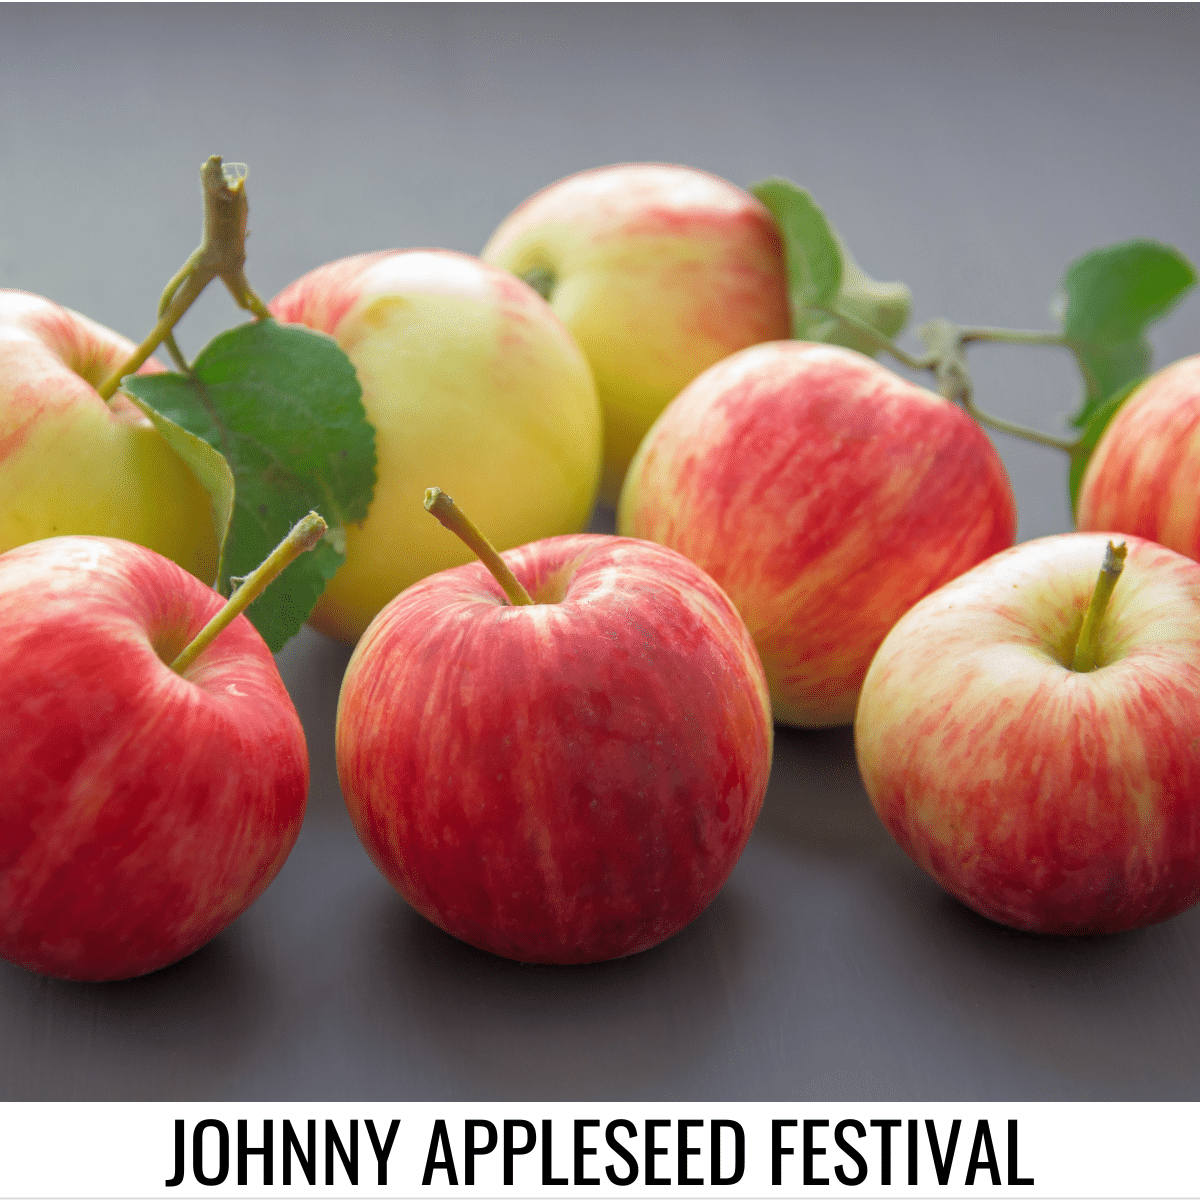 square image with a photo of 8 apples on a dark surface. A white strip at the bottom has the text Johnny Appleseed Festival. Image via Canva pro license